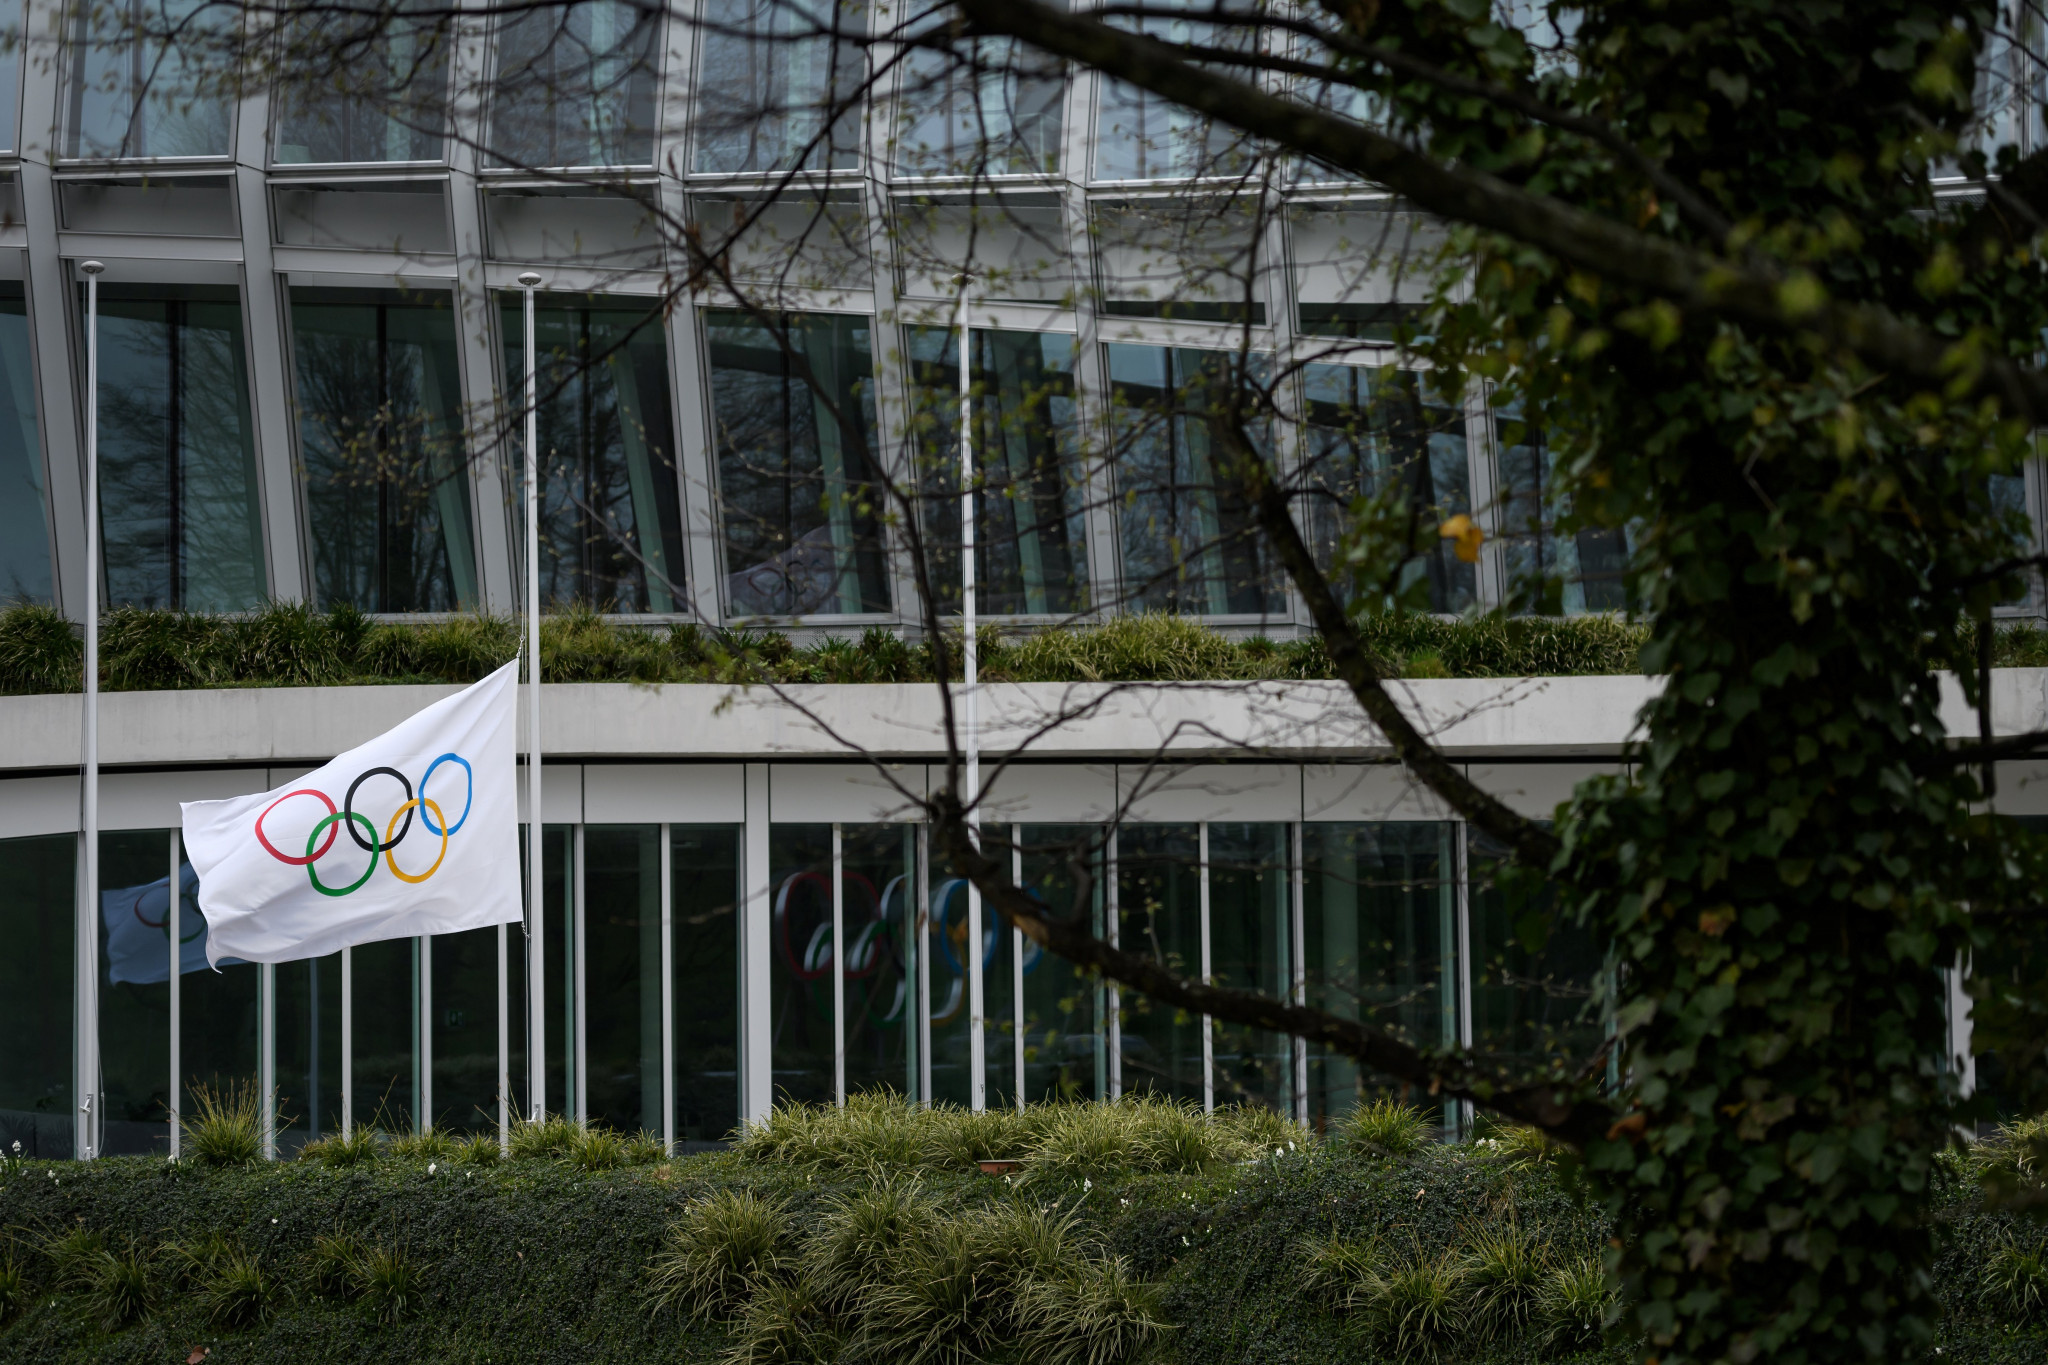 The International Olympic Committee will adopt a flexible approach to the election cycles of National Olympic Committees following the postponement of the Tokyo 2020 Olympic and Paralympic Games ©Getty Images